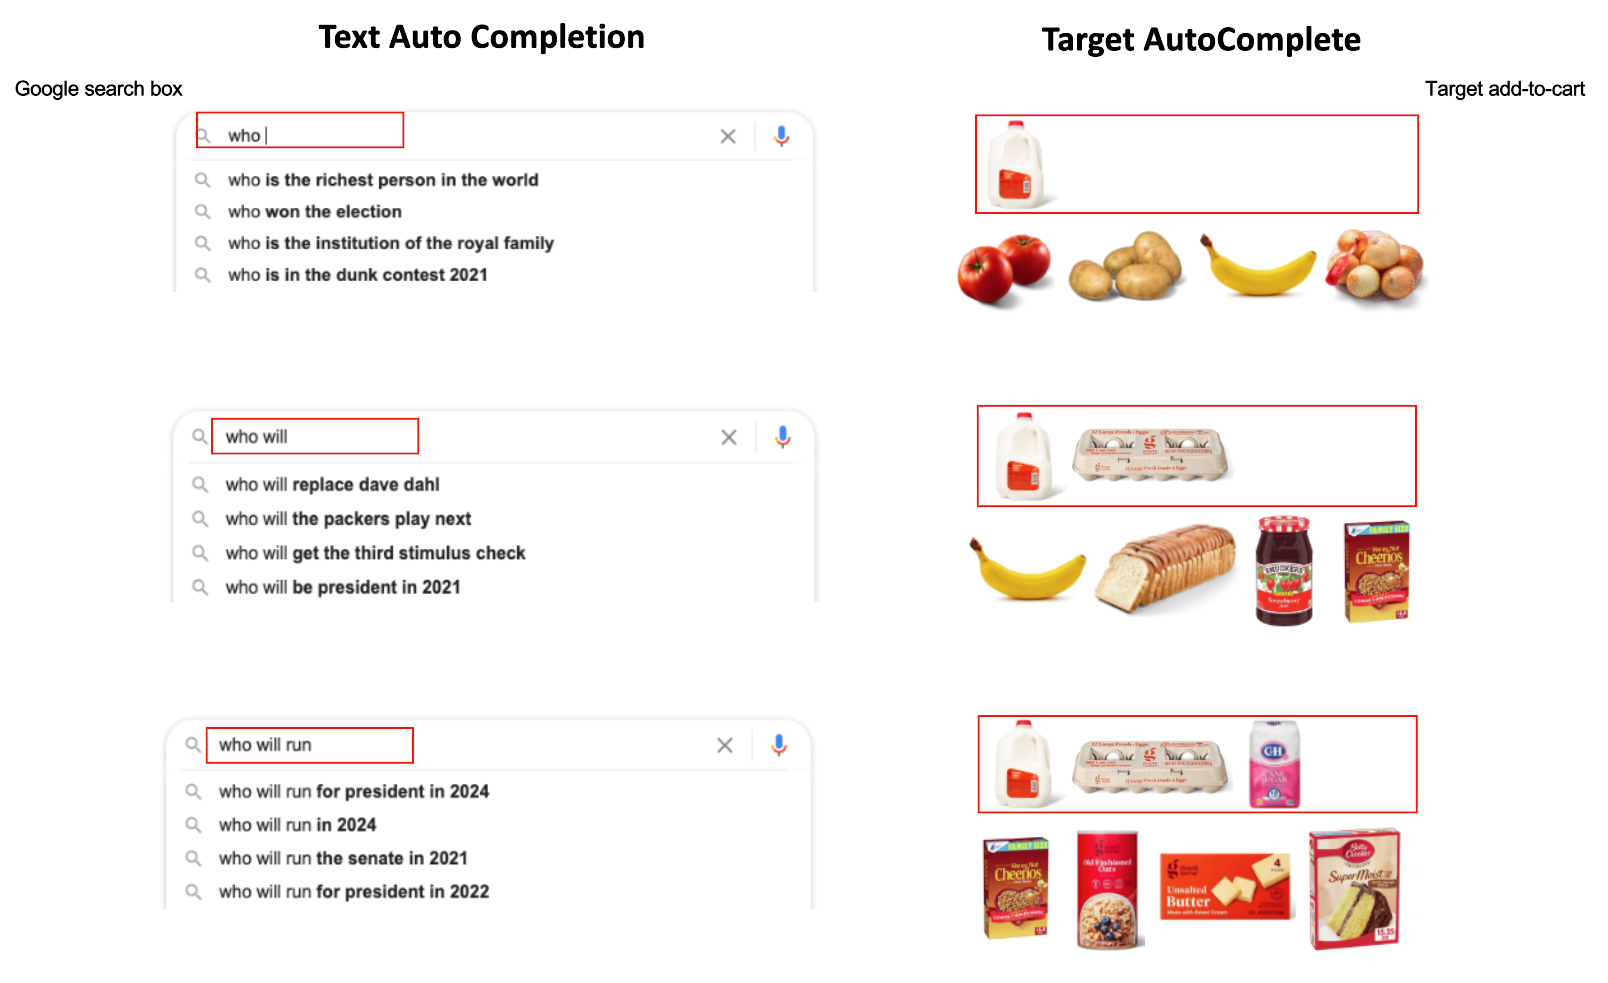 side by side view of three google search boxes with fields that say "who," "who will," and "who will run" next to three selections of Target grocery products like milk, apples, bananas, and cereal